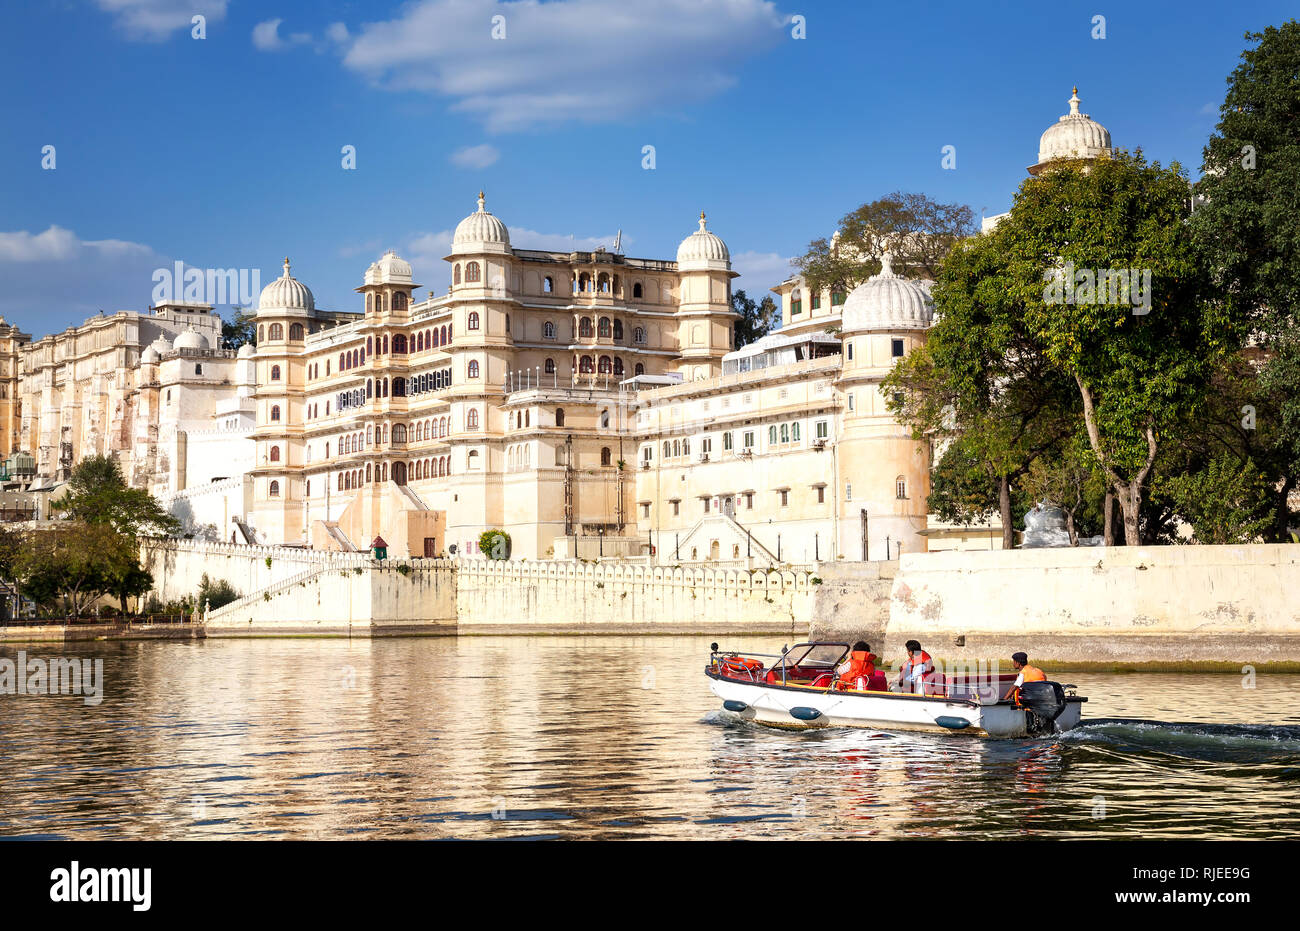 Boat with tourist on the Pichola lake with City Palace view at blue sky in Udaipur, Rajasthan, India Stock Photo